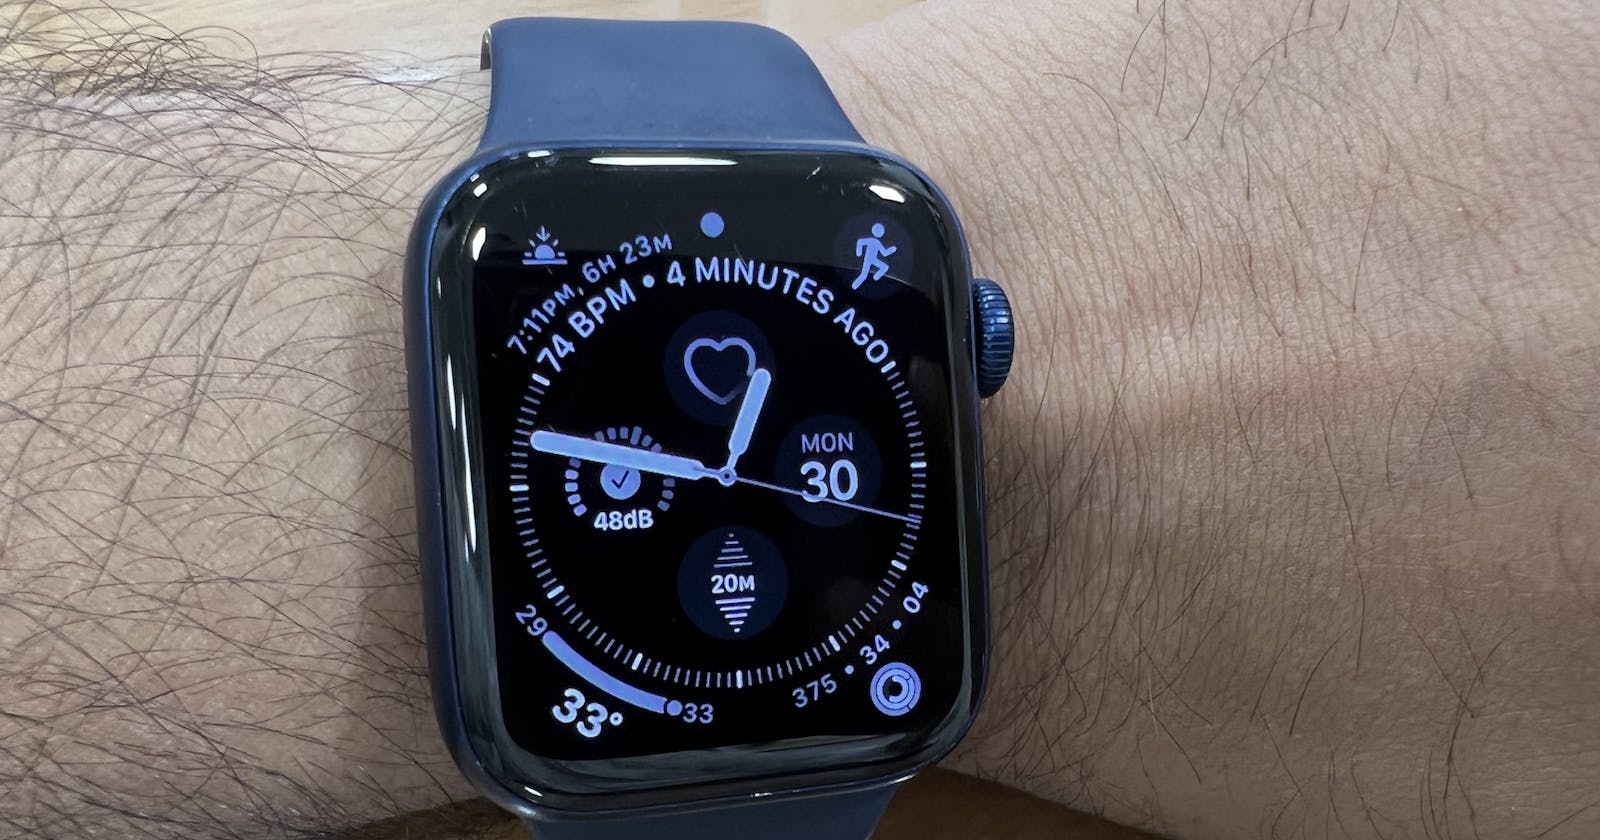 Extend Apple Watch battery life to 2x